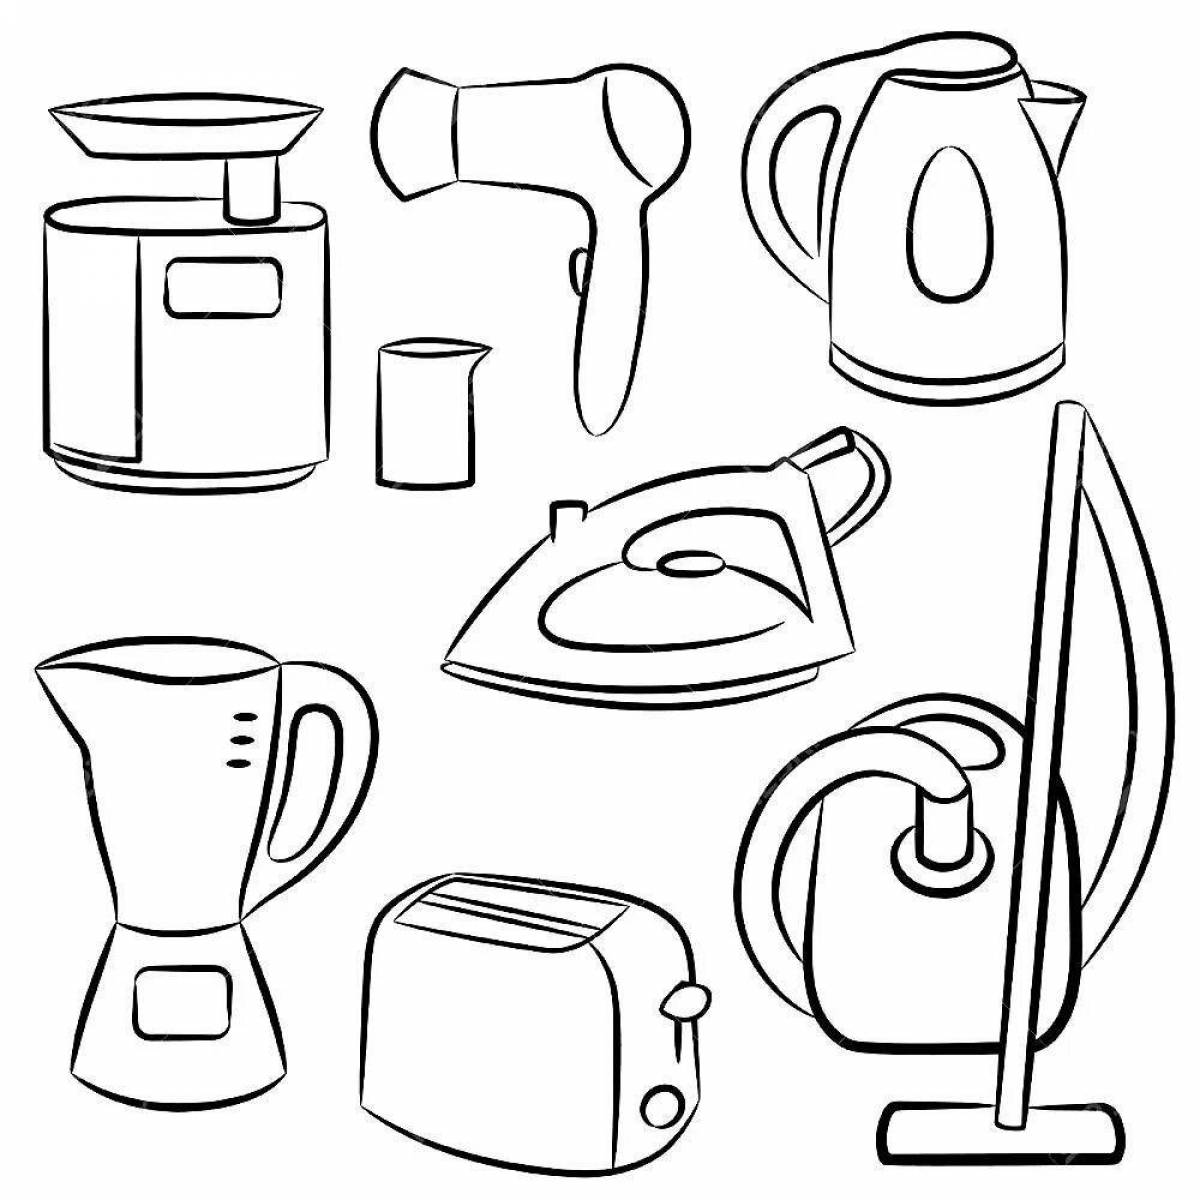 Colorful electrical devices coloring page